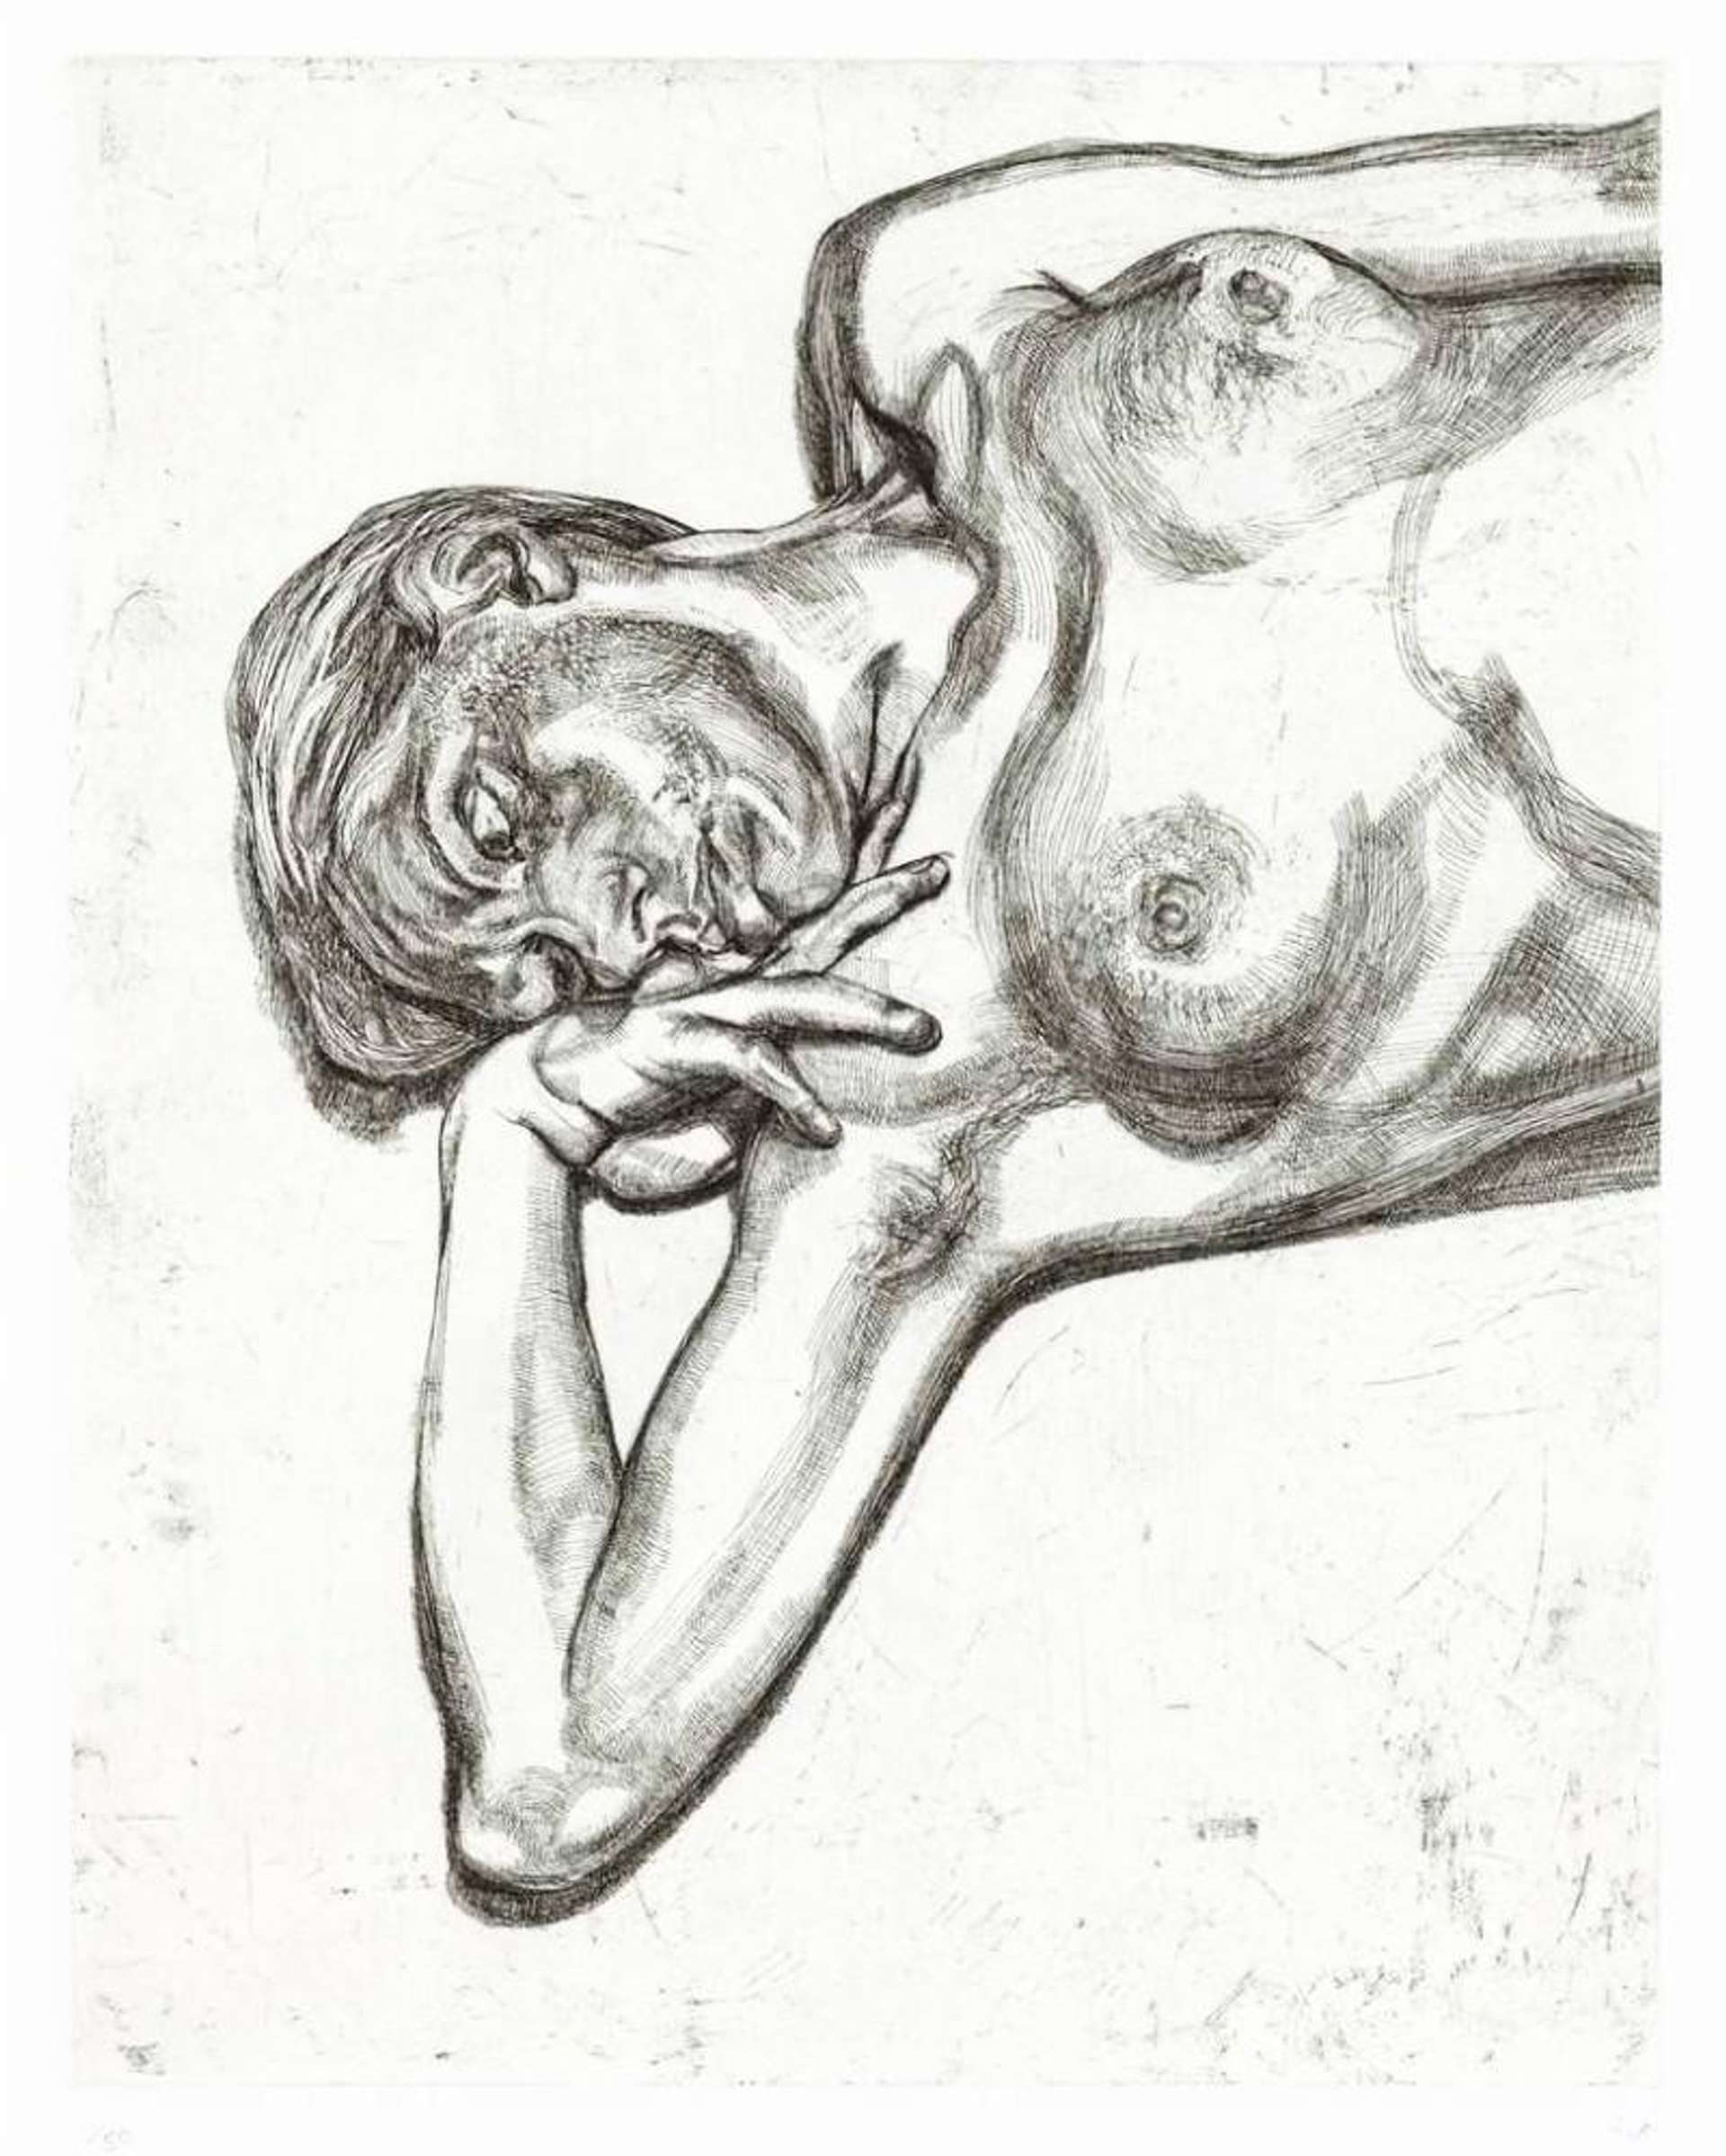 Lucian Freud's Head And Shoulders Of Girl. A drawing of a nude woman from the chest up. She is lying on the ground with her face resting on her hand.